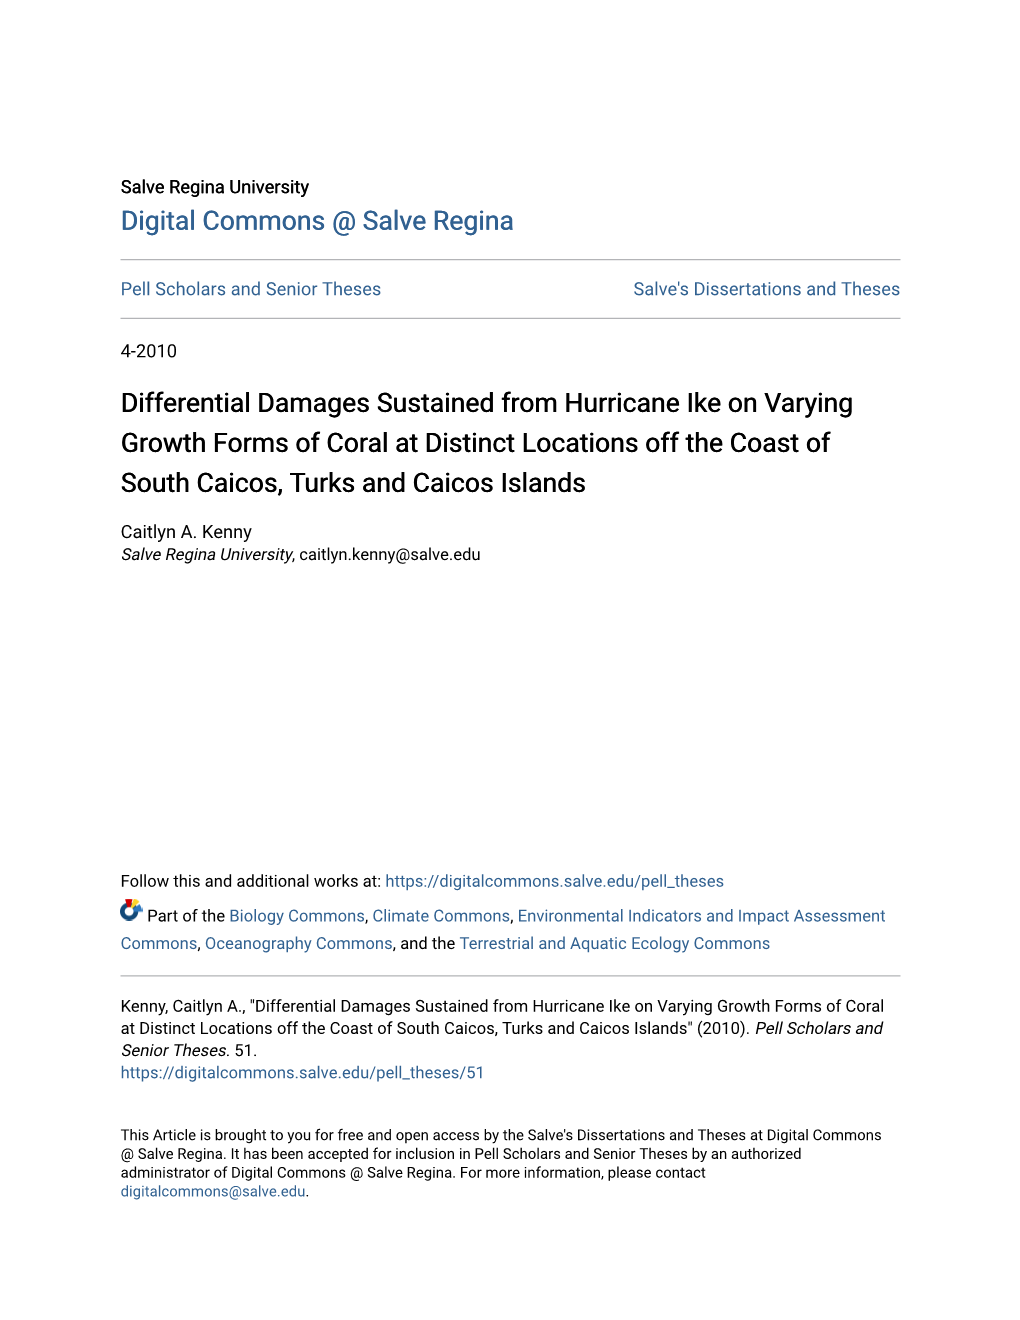 Differential Damages Sustained from Hurricane Ike on Varying Growth Forms of Coral at Distinct Locations Off the Coast of South Caicos, Turks and Caicos Islands